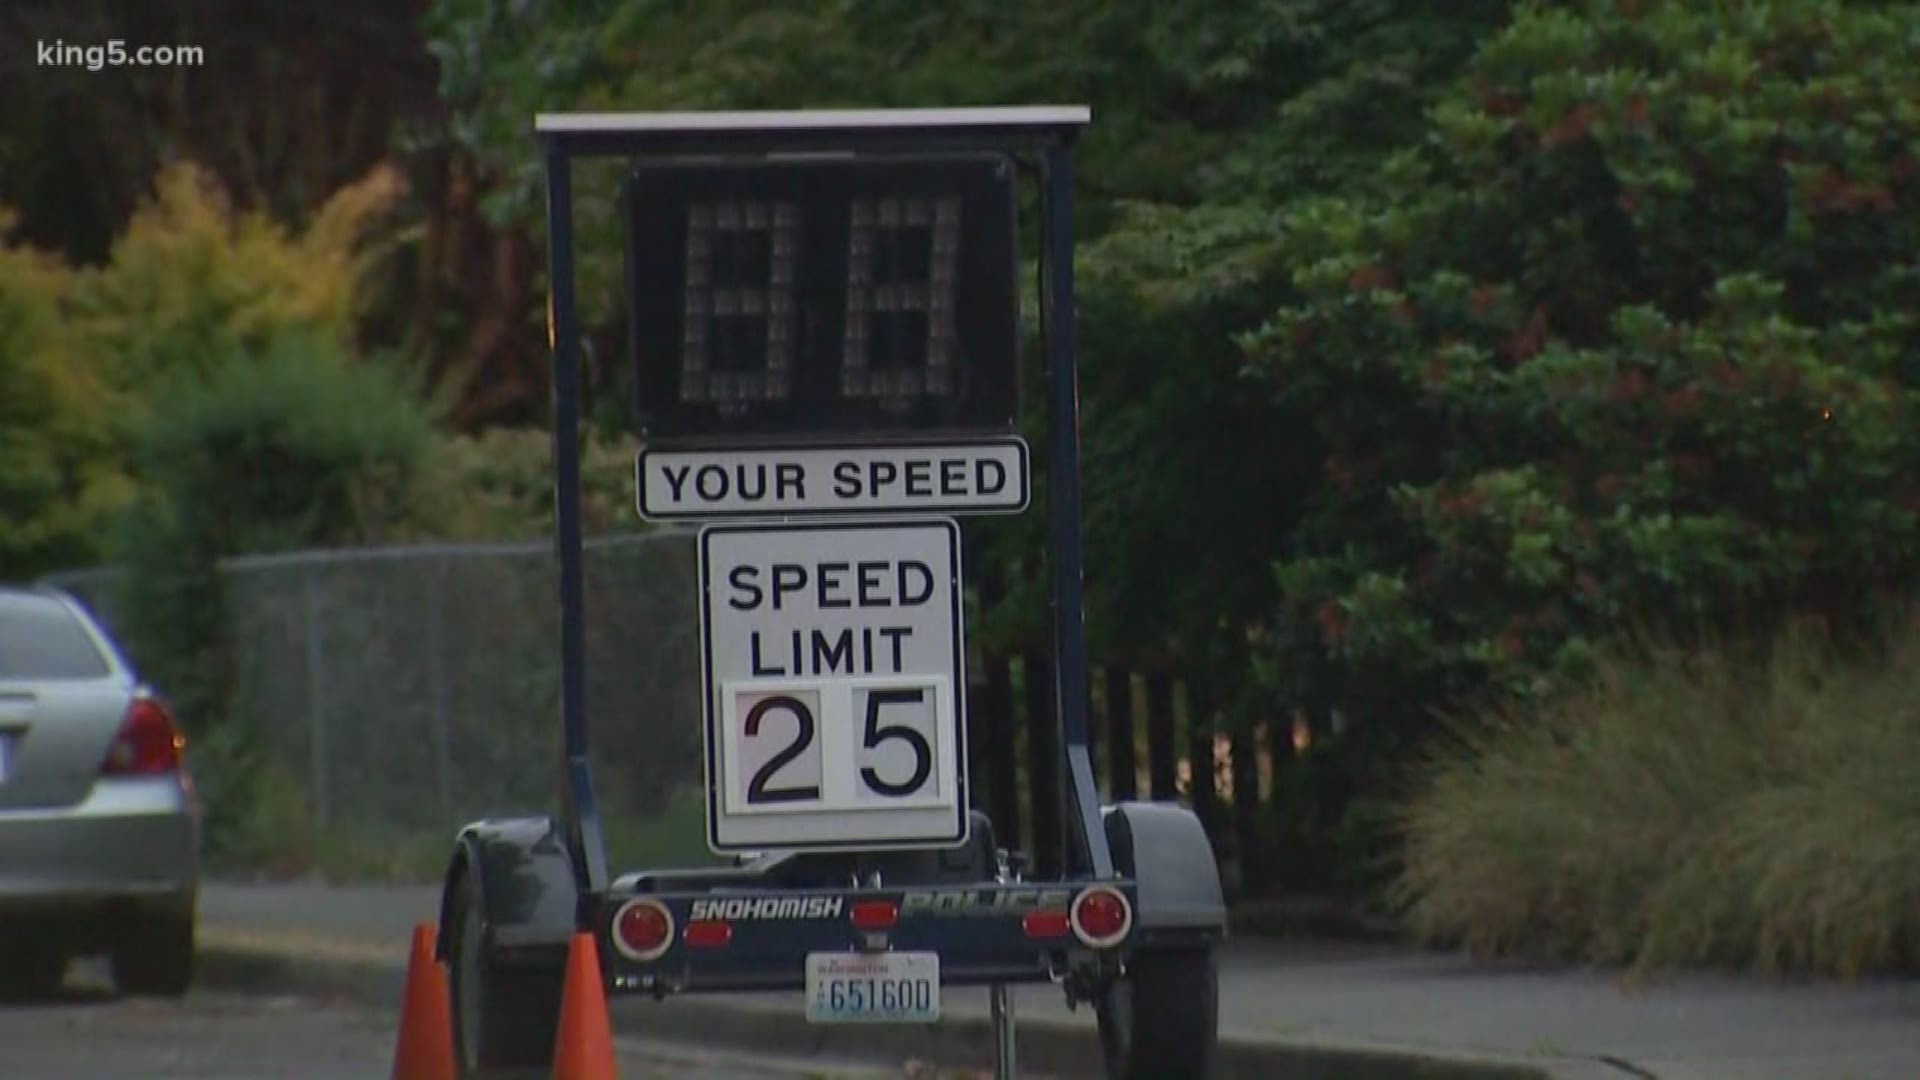 The city of Snohomish launches a pilot program lowering speed limit on neighborhood street.